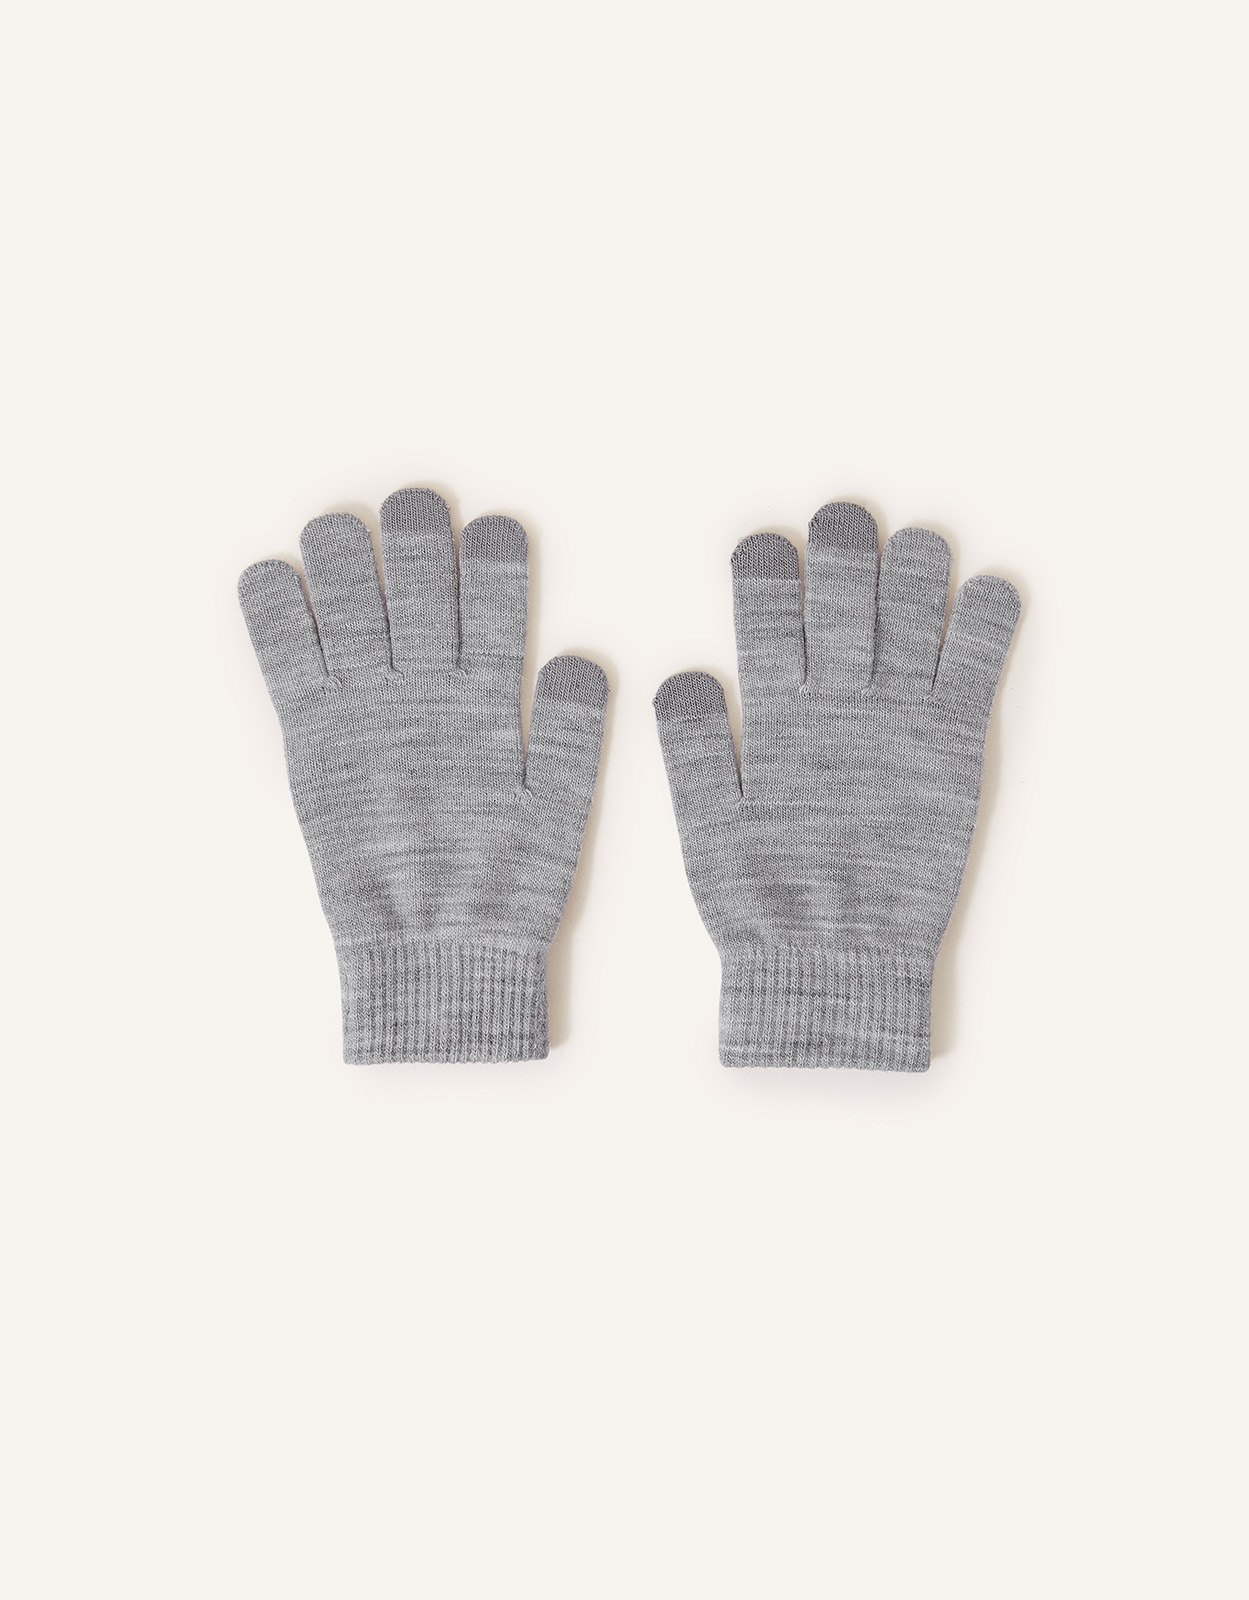 Accessorize Women's Super-Stretchy Touchscreen Gloves Grey, Size: One Size